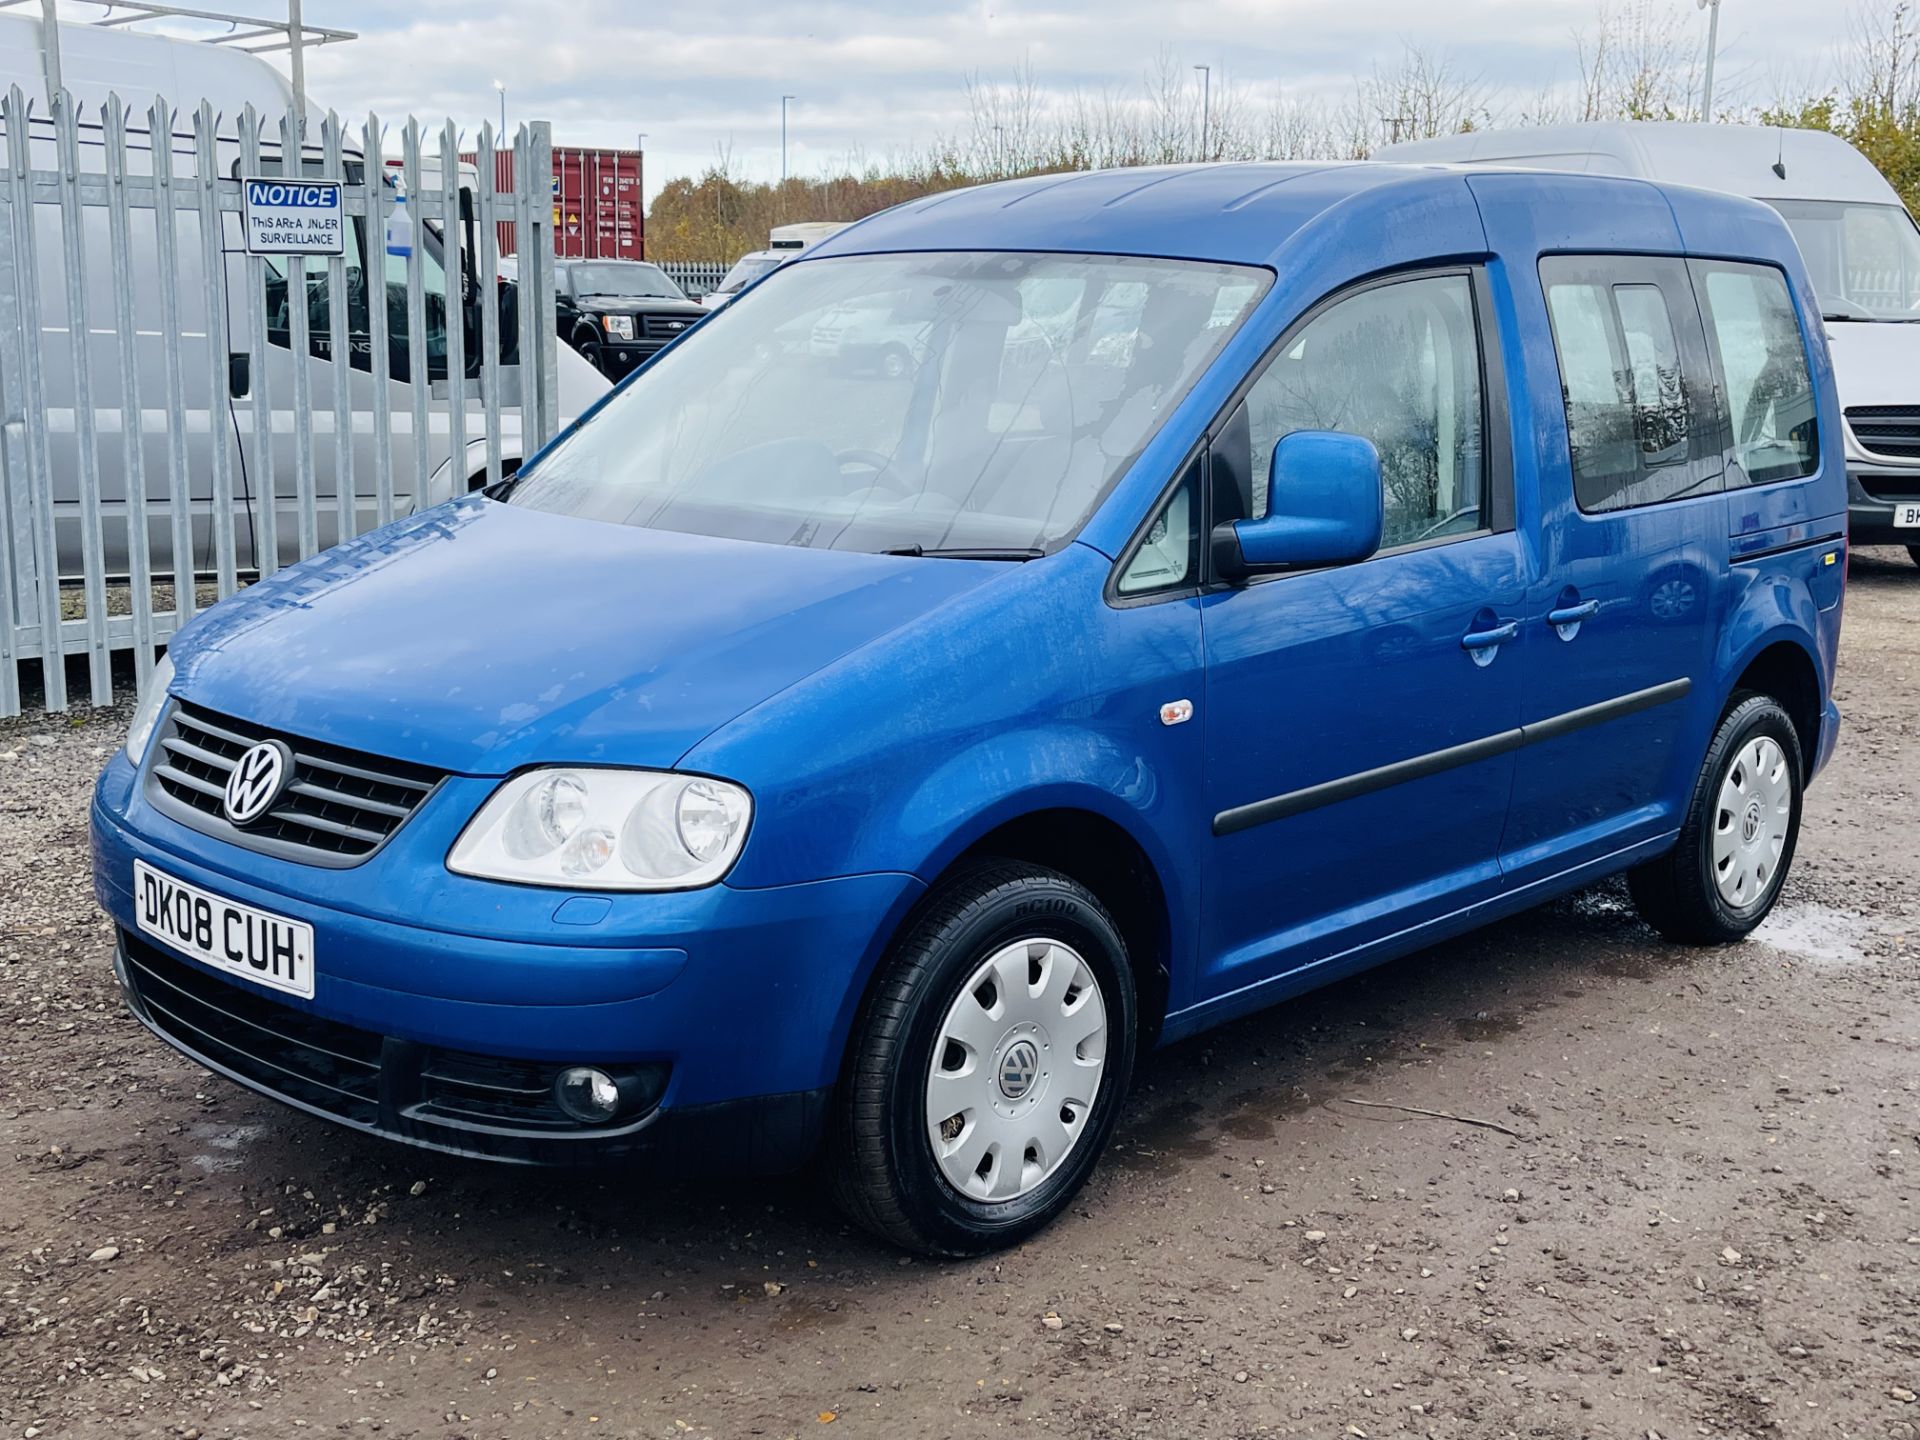 ** ON SALE ** Volkswagen Caddy Life 1.9 TDI DSG Auto 2008 '08 Reg'Air Con - Only Done 38k - - Image 5 of 24